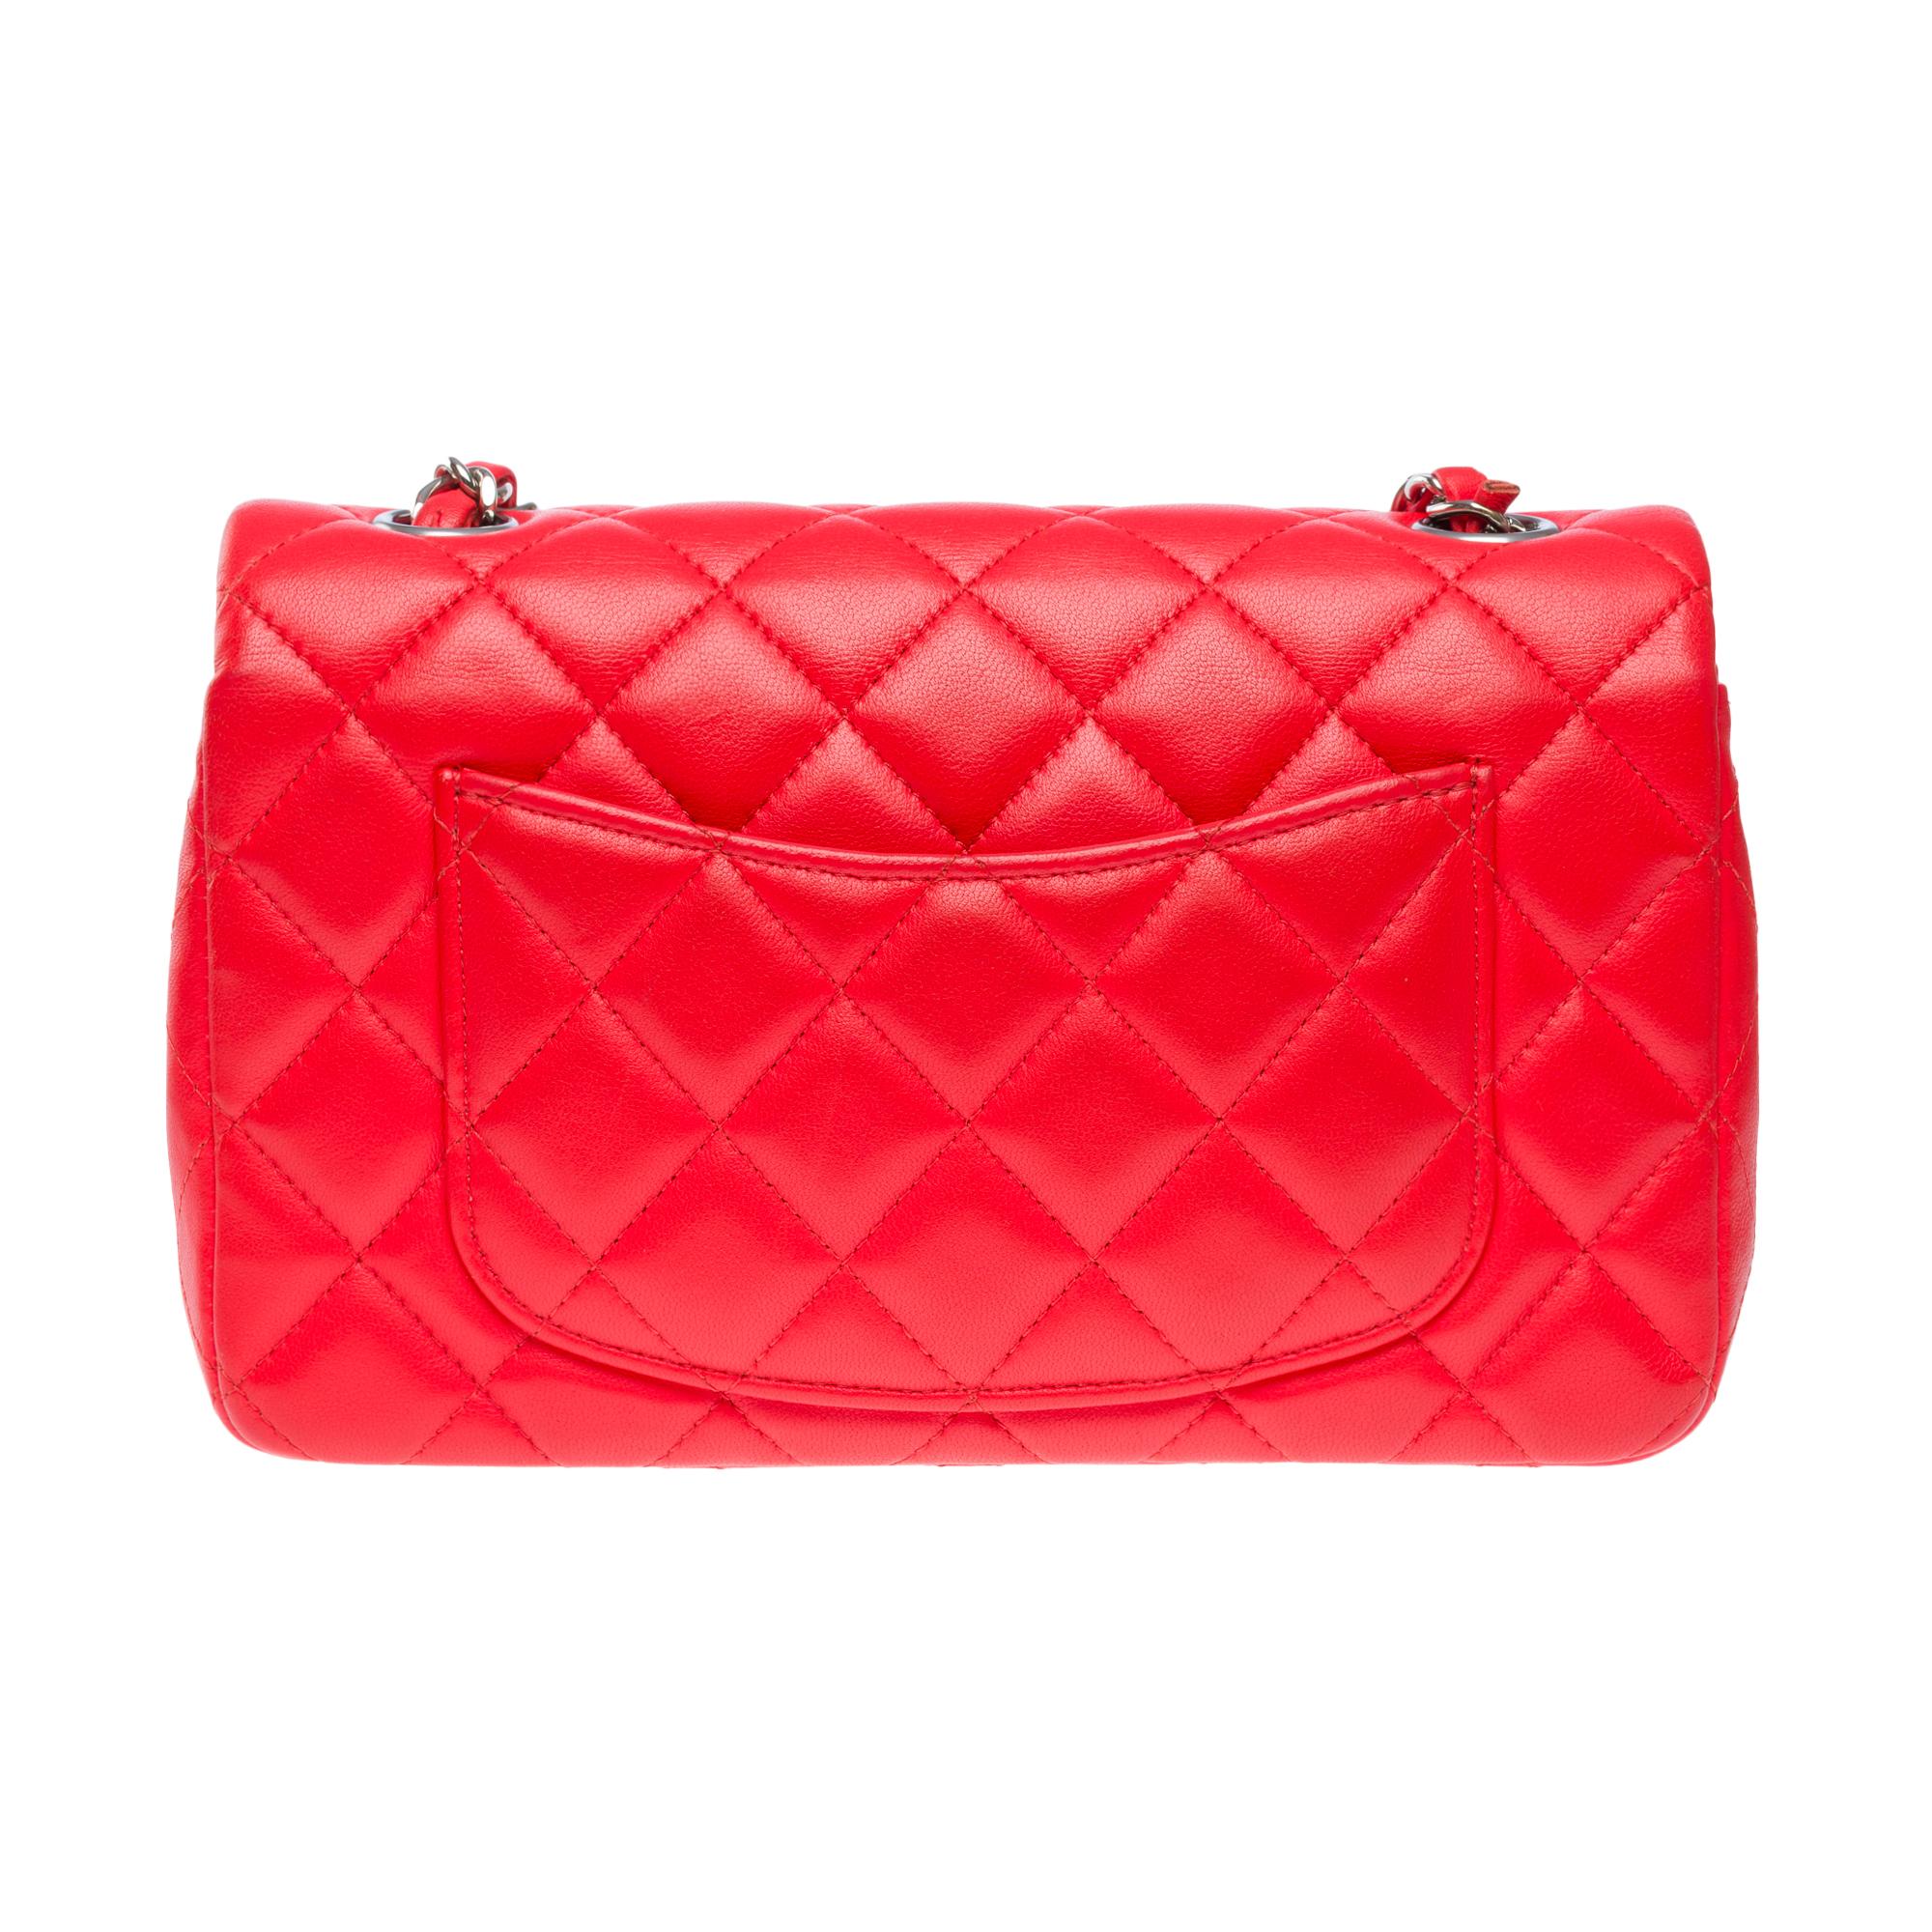 Women's Amazing Chanel Timeless Mini shoulder flap bag in Red quilted lambskin,  SHW For Sale